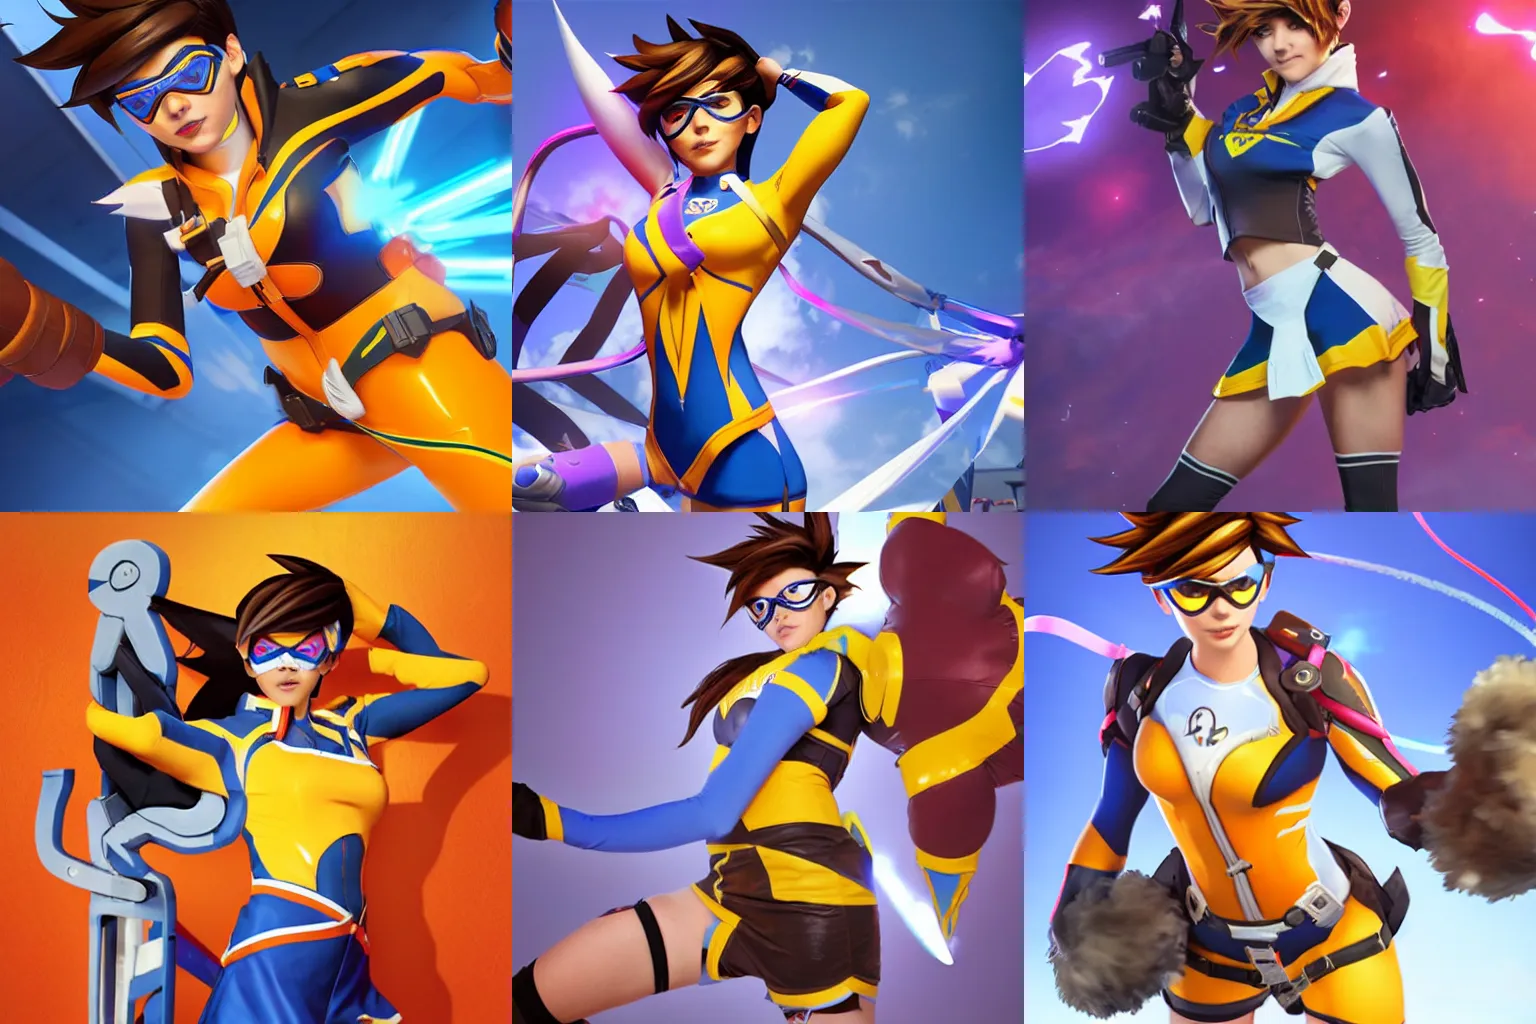 Prompt: tracer from overwatch in a cheerleader outfit, promo art